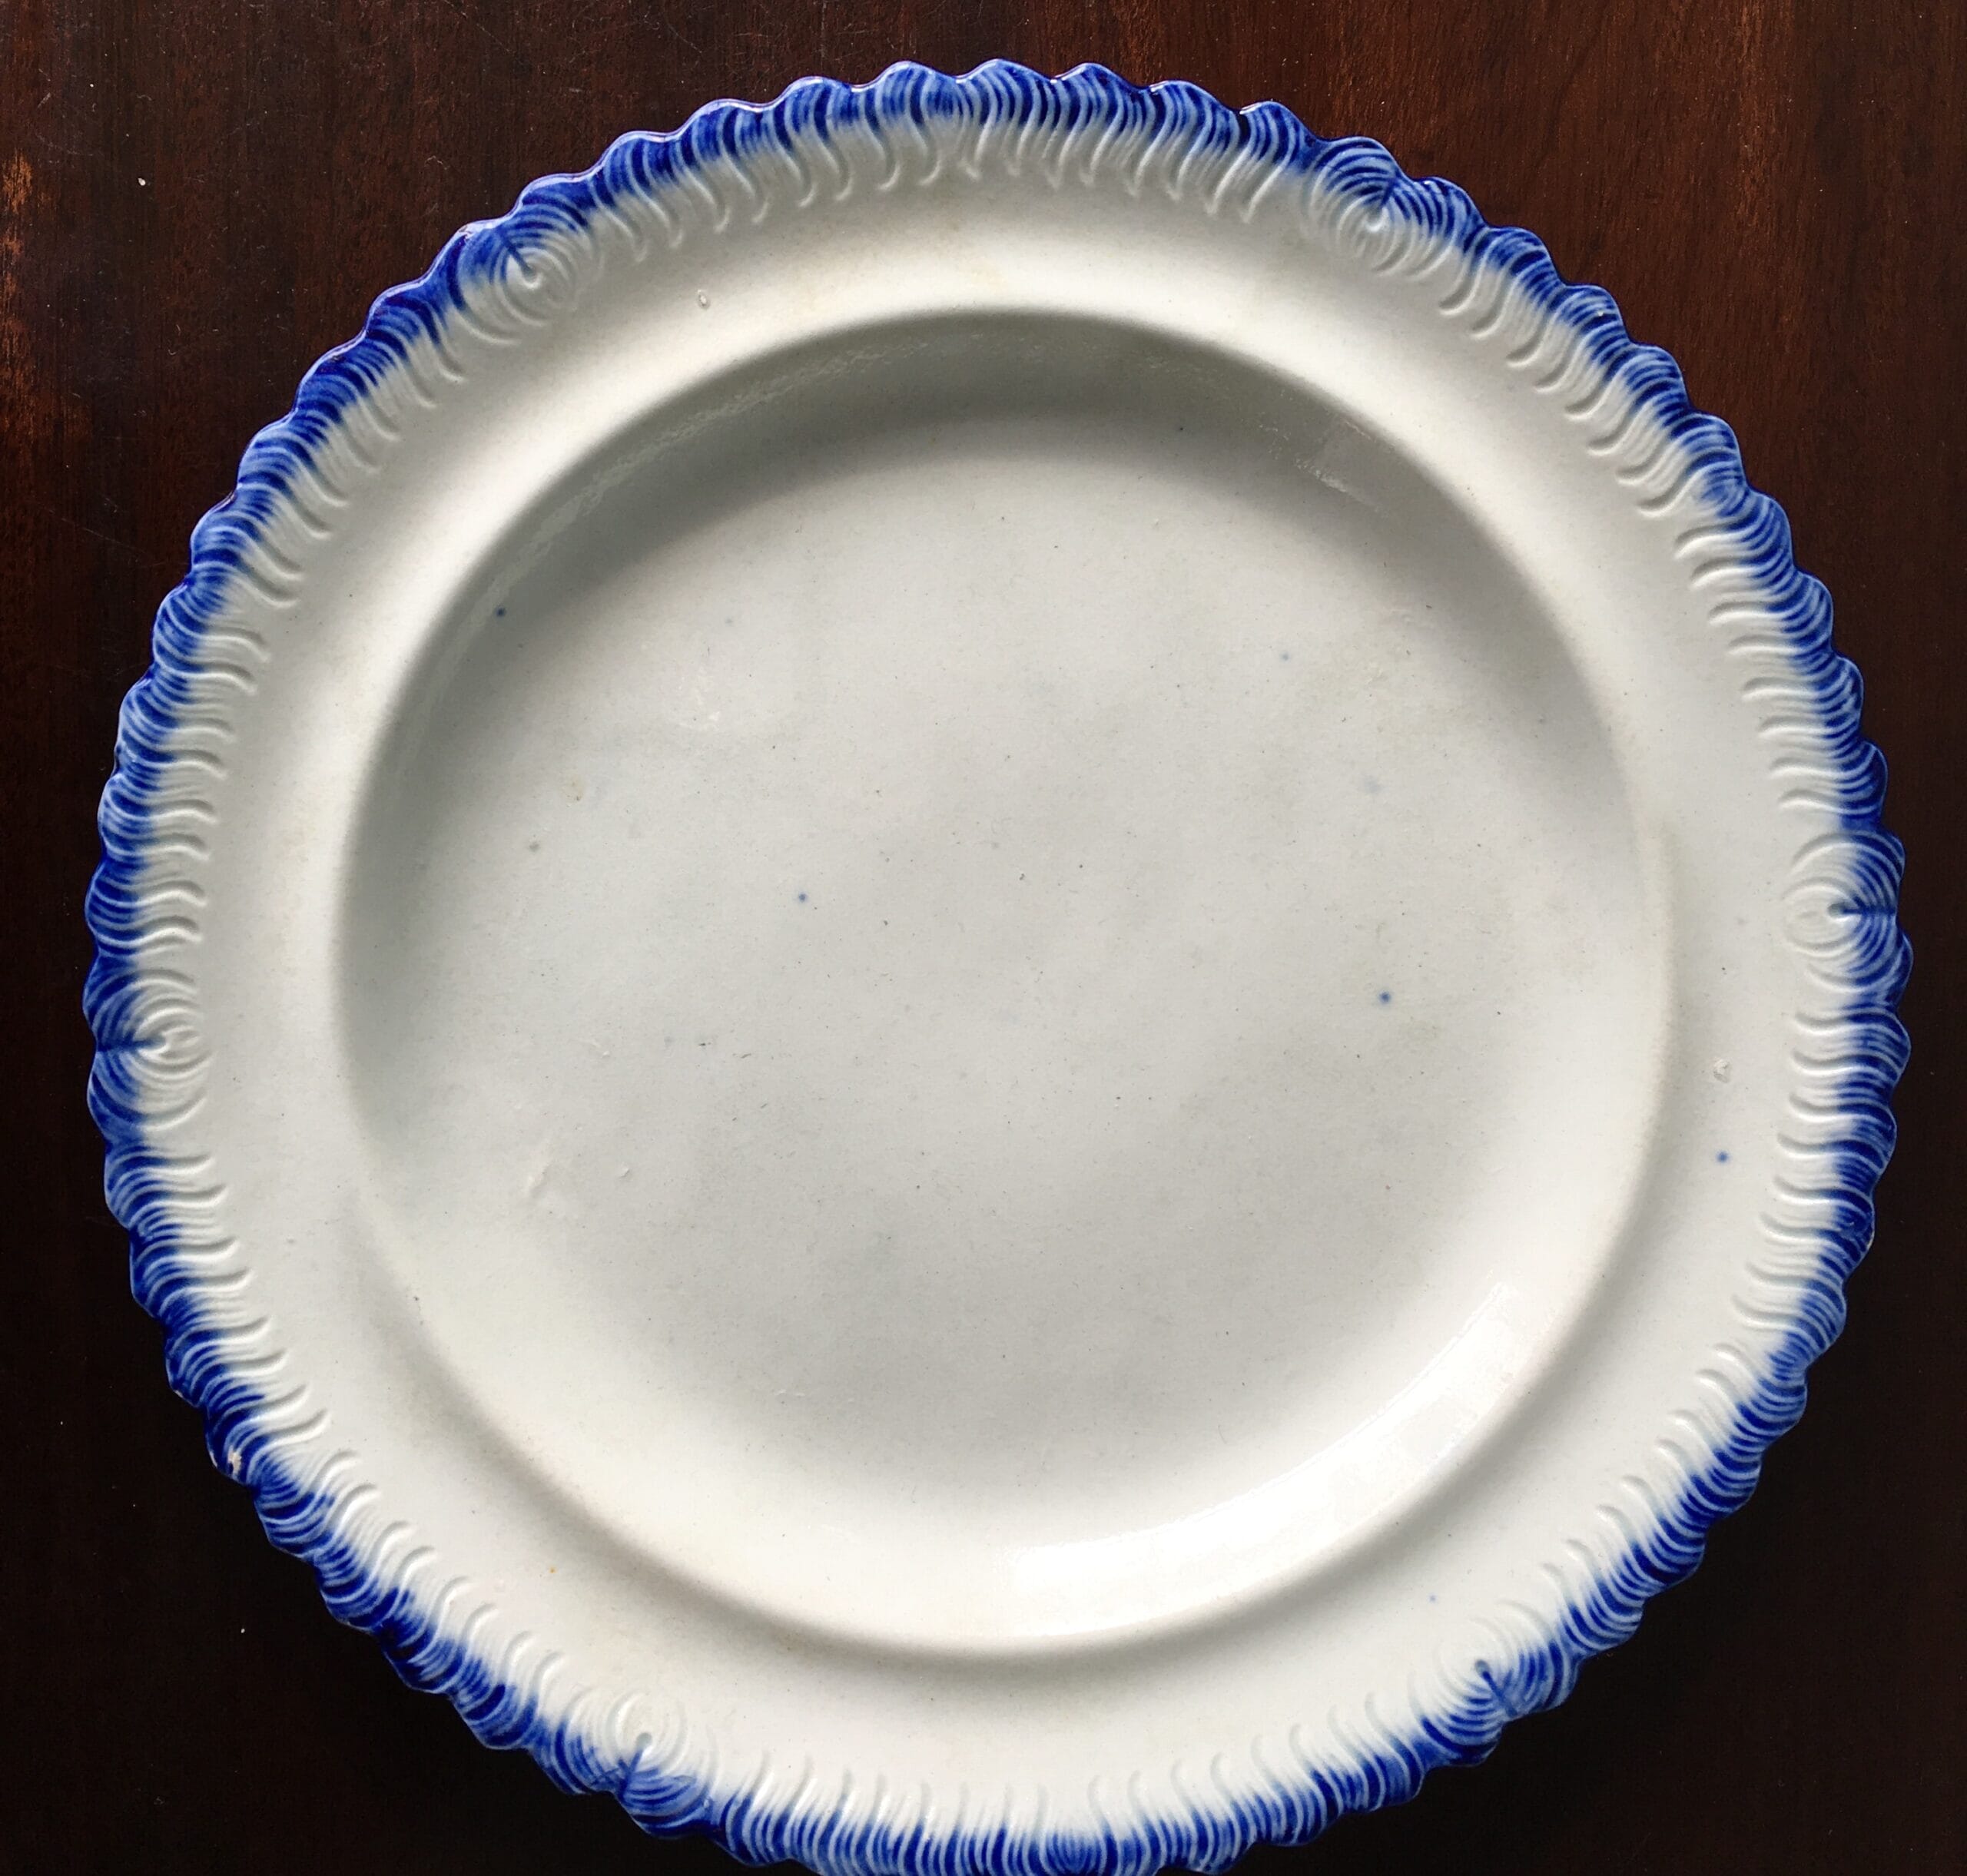 Glamorgan pottery plate with feathered rim, Baker, Bevans & Irwin, c. 1820. -0